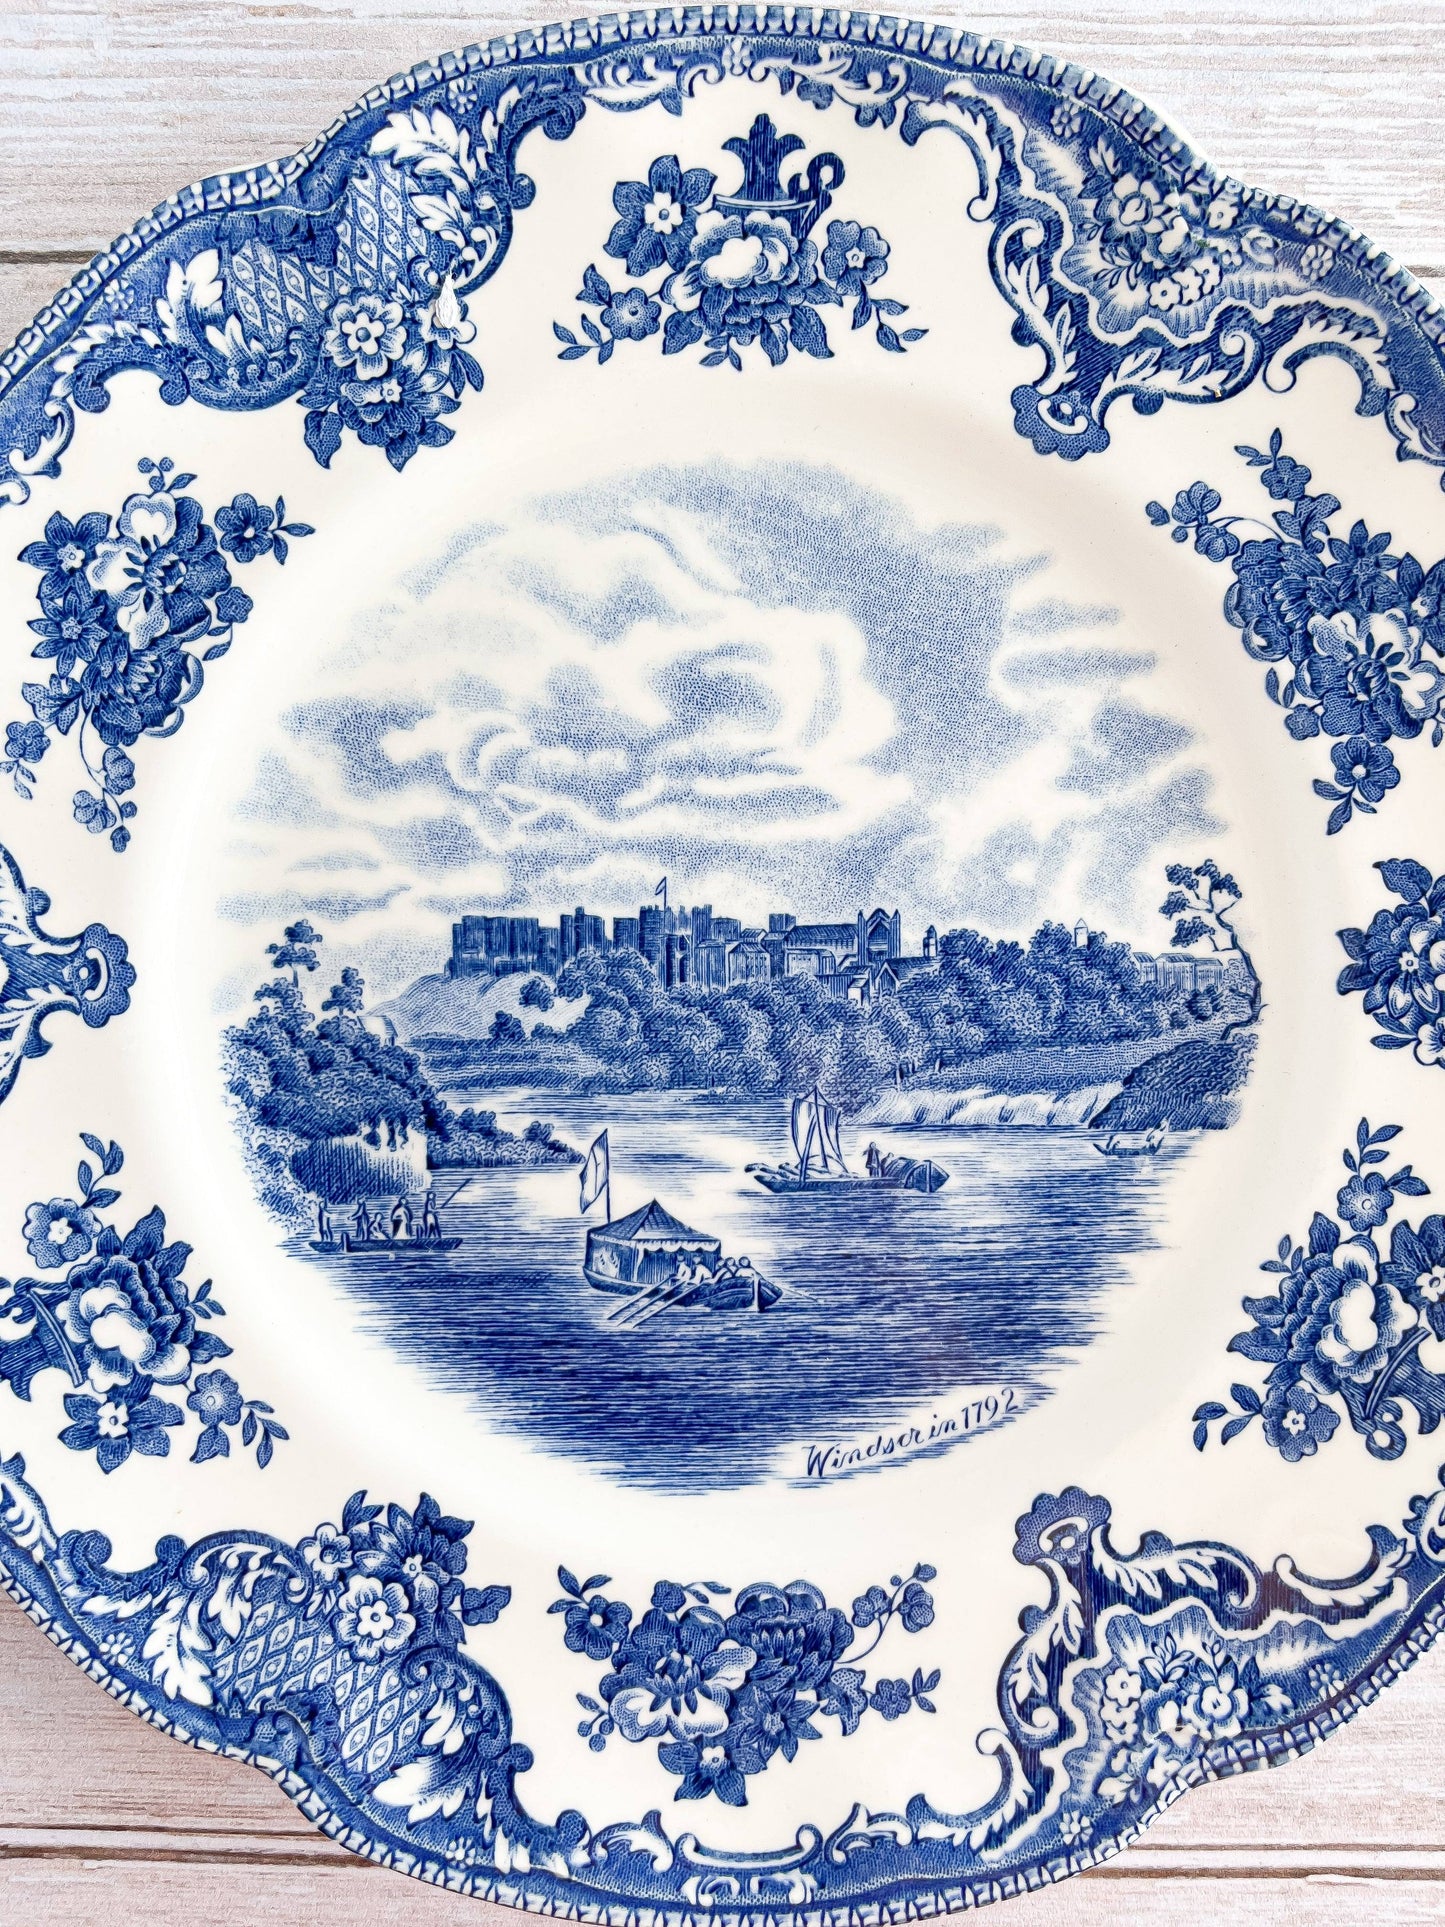 Johnson Bros Old Britain Castles Luncheon Plate - 'Windsor in 1792’ Design - SOSC Home